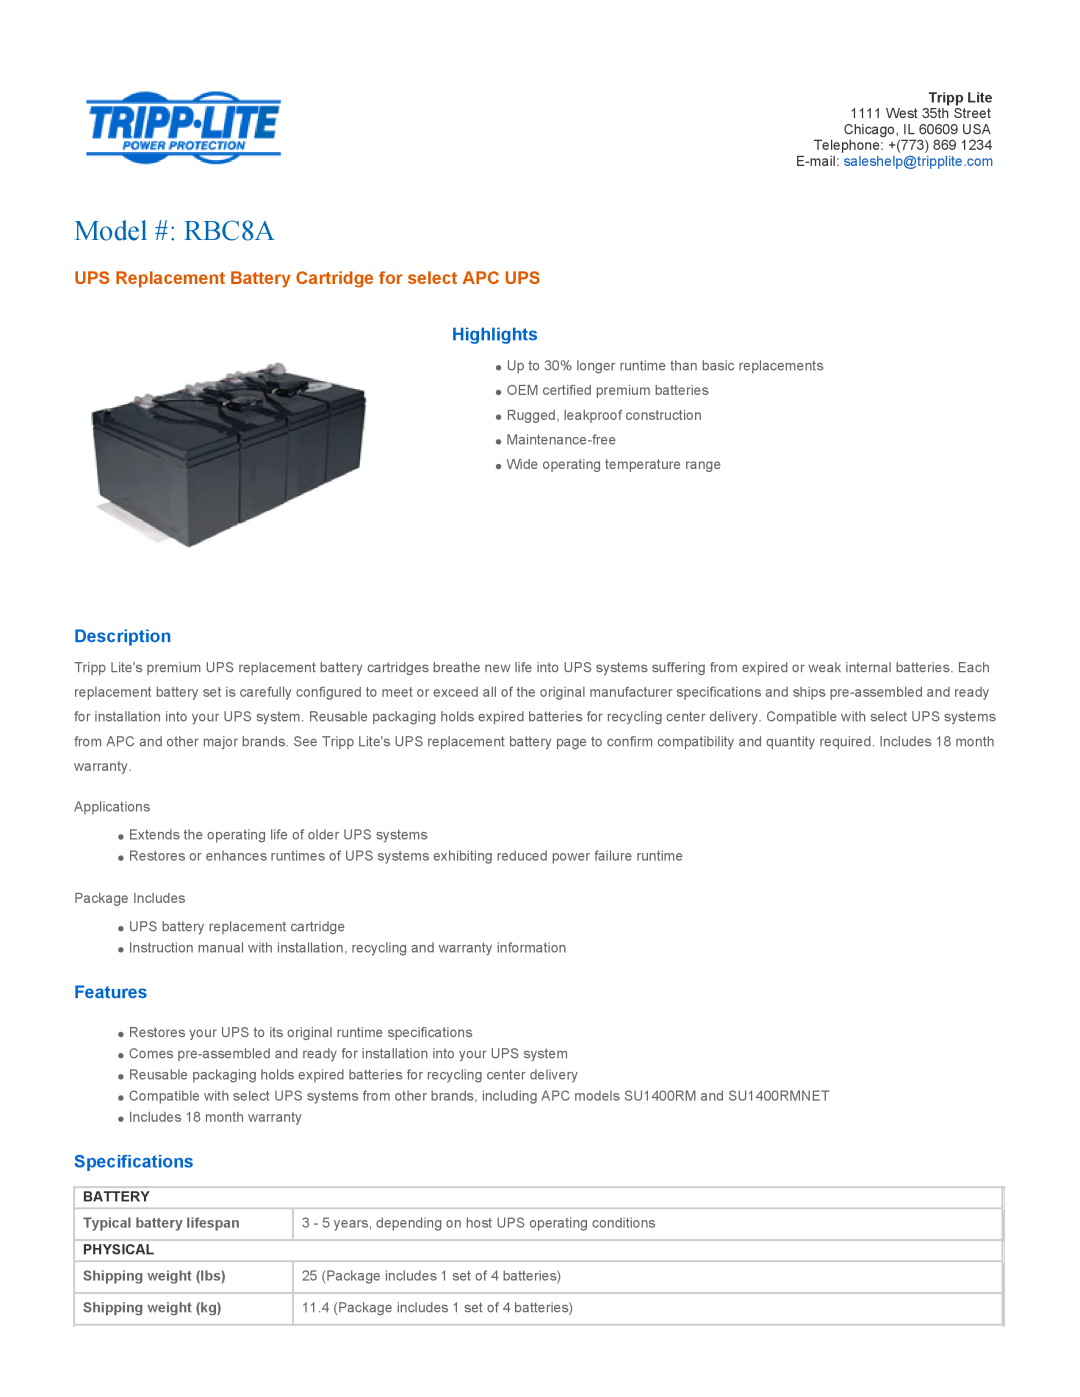 Tripp Lite specifications Physical, Model # RBC8A, UPS Replacement Battery Cartridge for select APC UPS, Highlights 